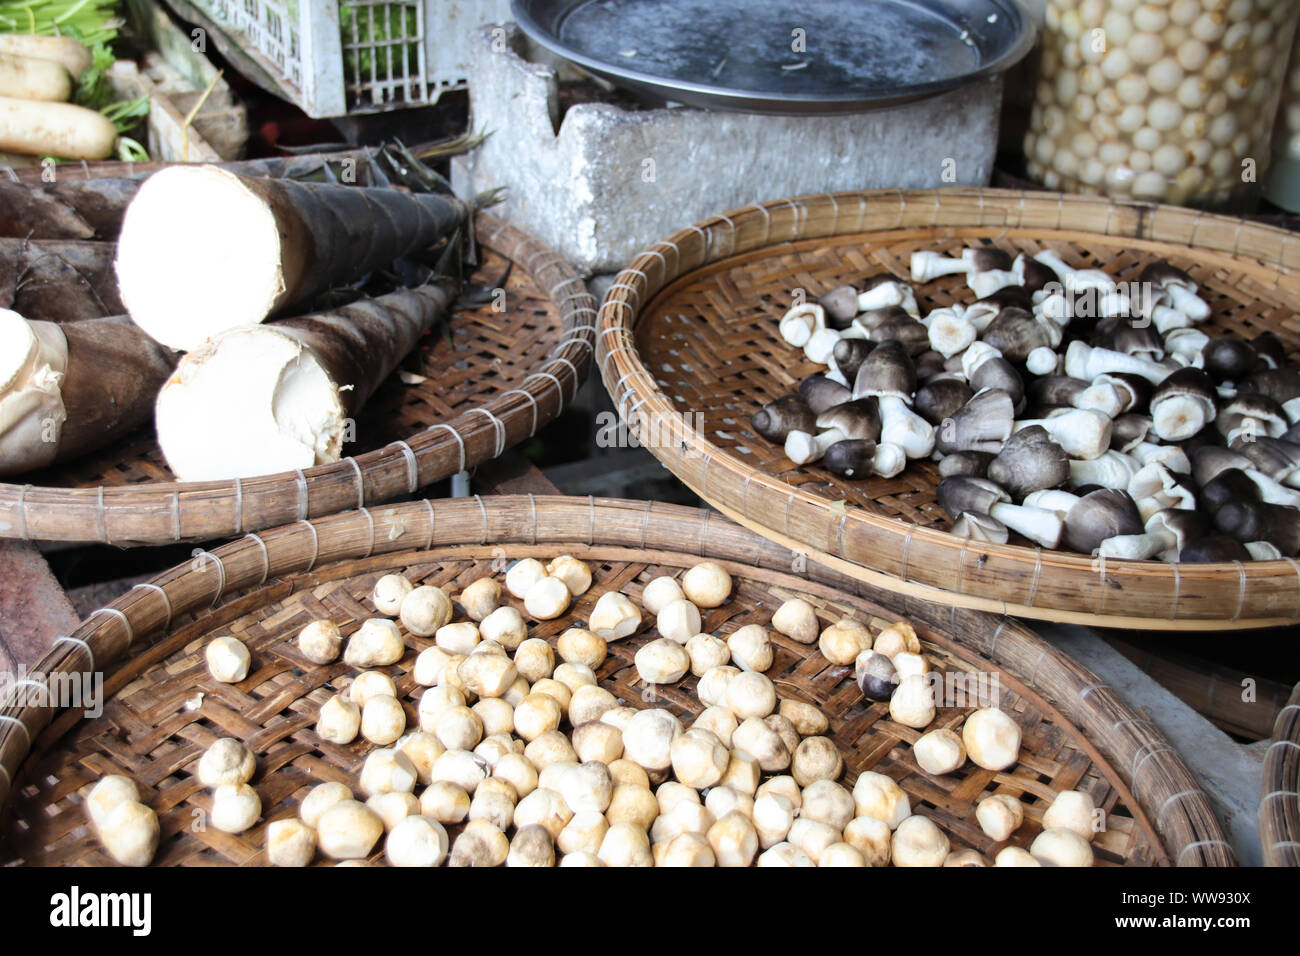 Paddy straw mushroom (Volvariella volvacea) and bamboo shoots sold in the local market of Luang Prabang Laos, candid authentic daily life Stock Photo